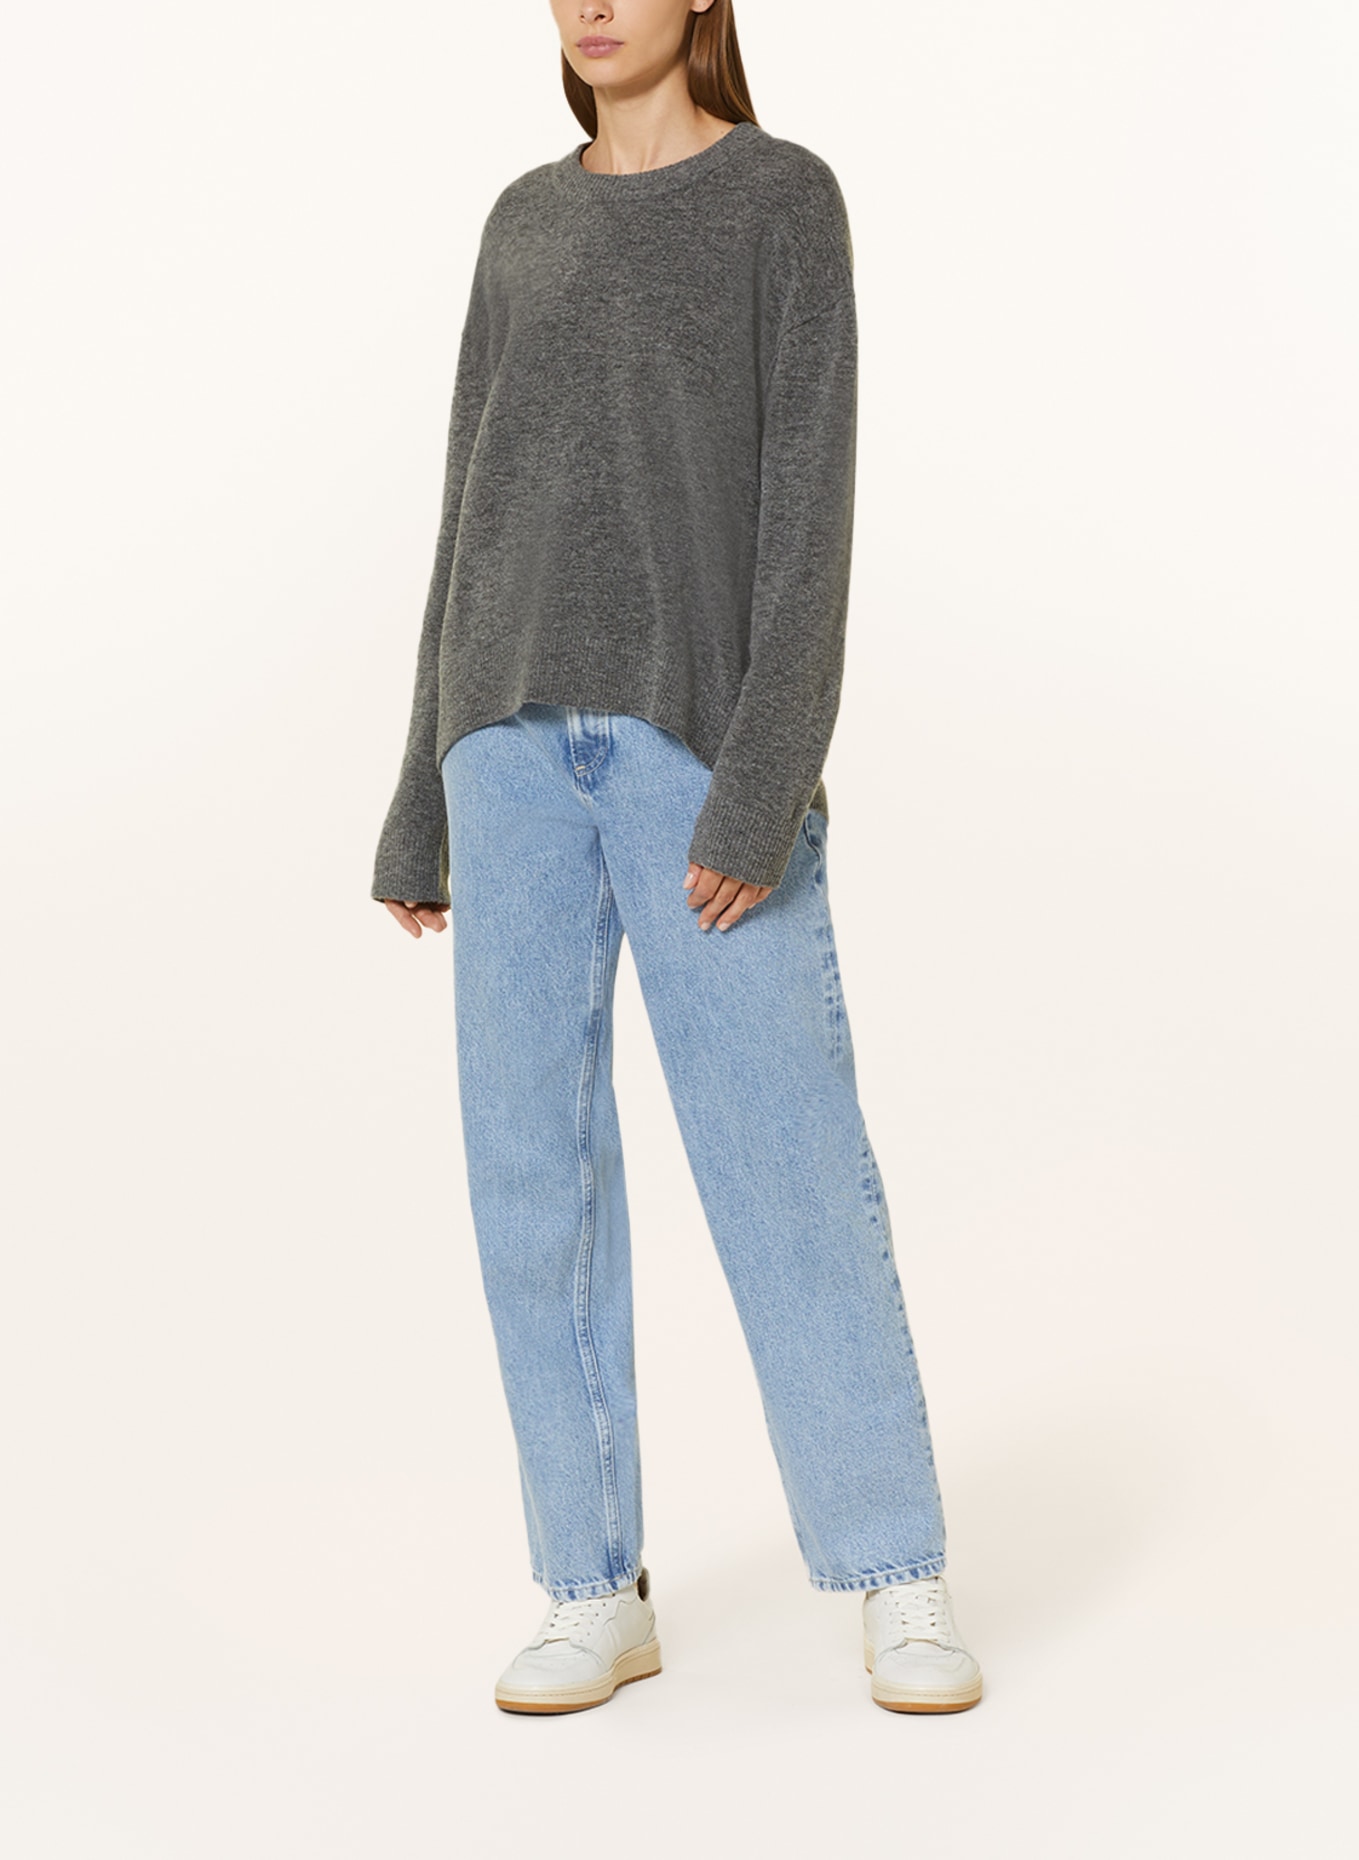 Marc O'Polo DENIM Oversized sweater, Color: GRAY (Image 2)